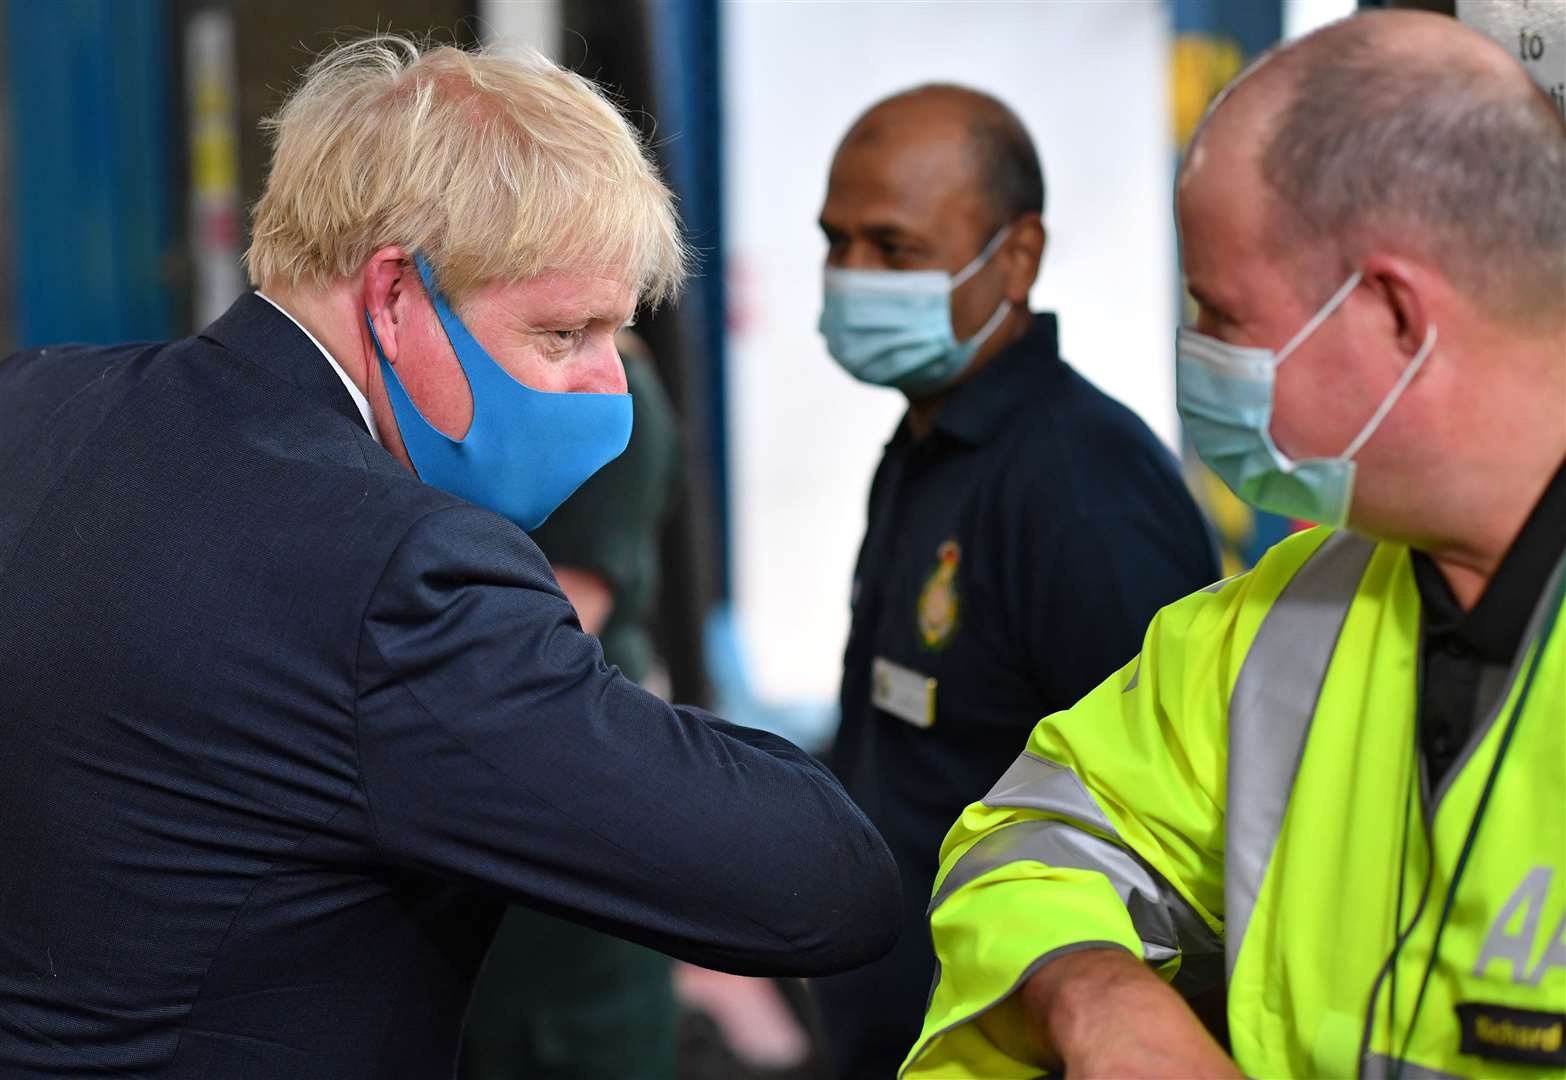 Boris Johnson, wearing a face covering, elbow bumps an employee during a visit to the London Ambulance Service (Ben Stansall/PA)